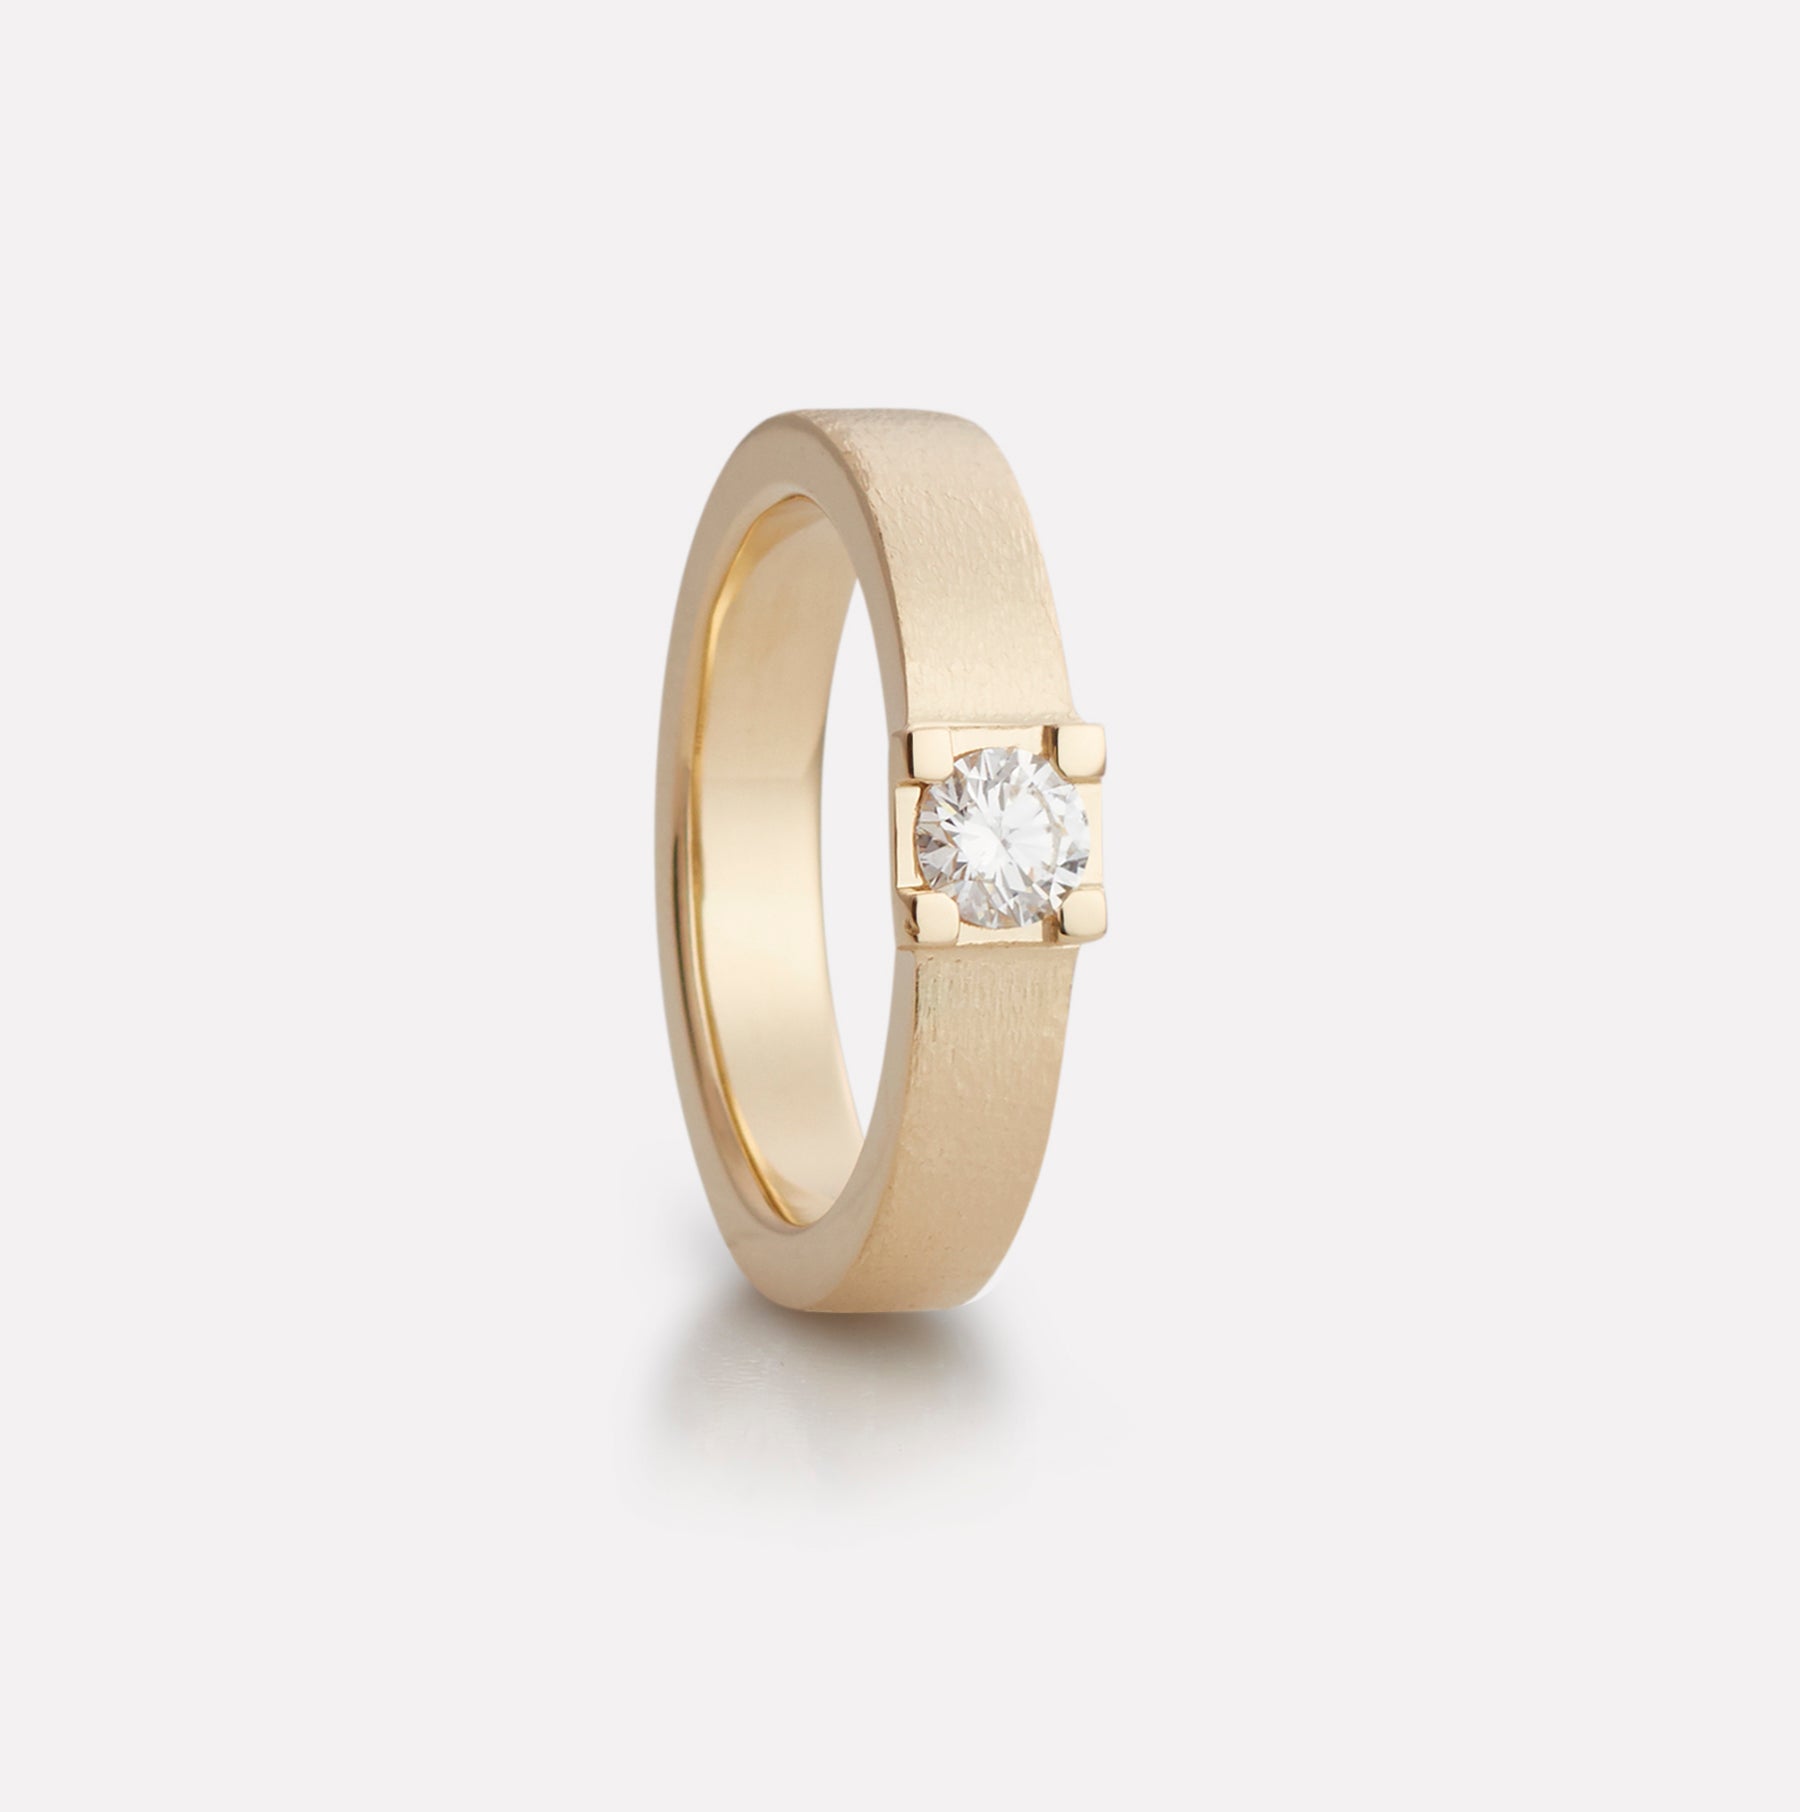 Magnificent ring in yellow gold with diamond